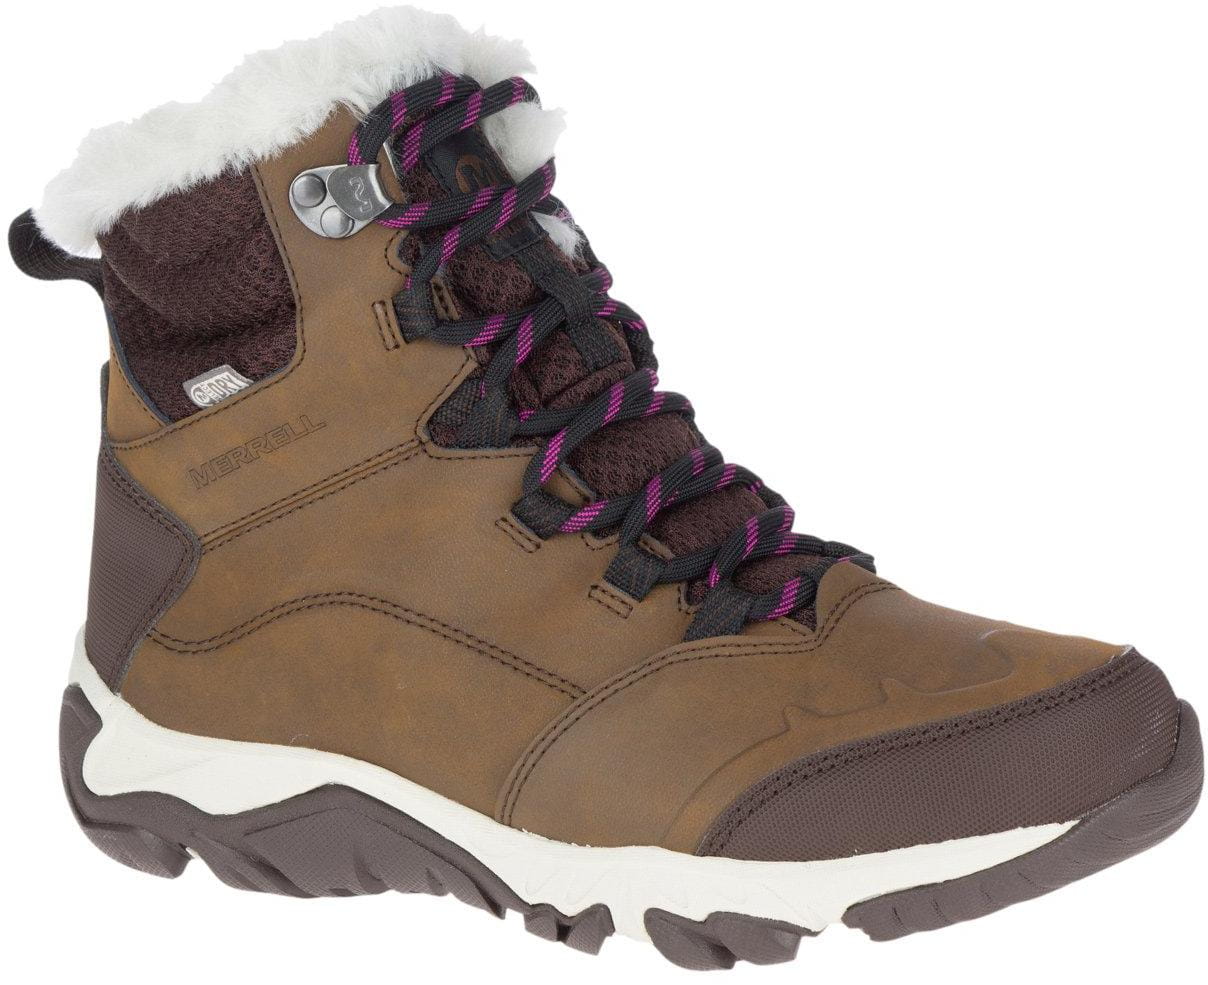 Winterschuhe Merrell Thermo Fractal Mid WP